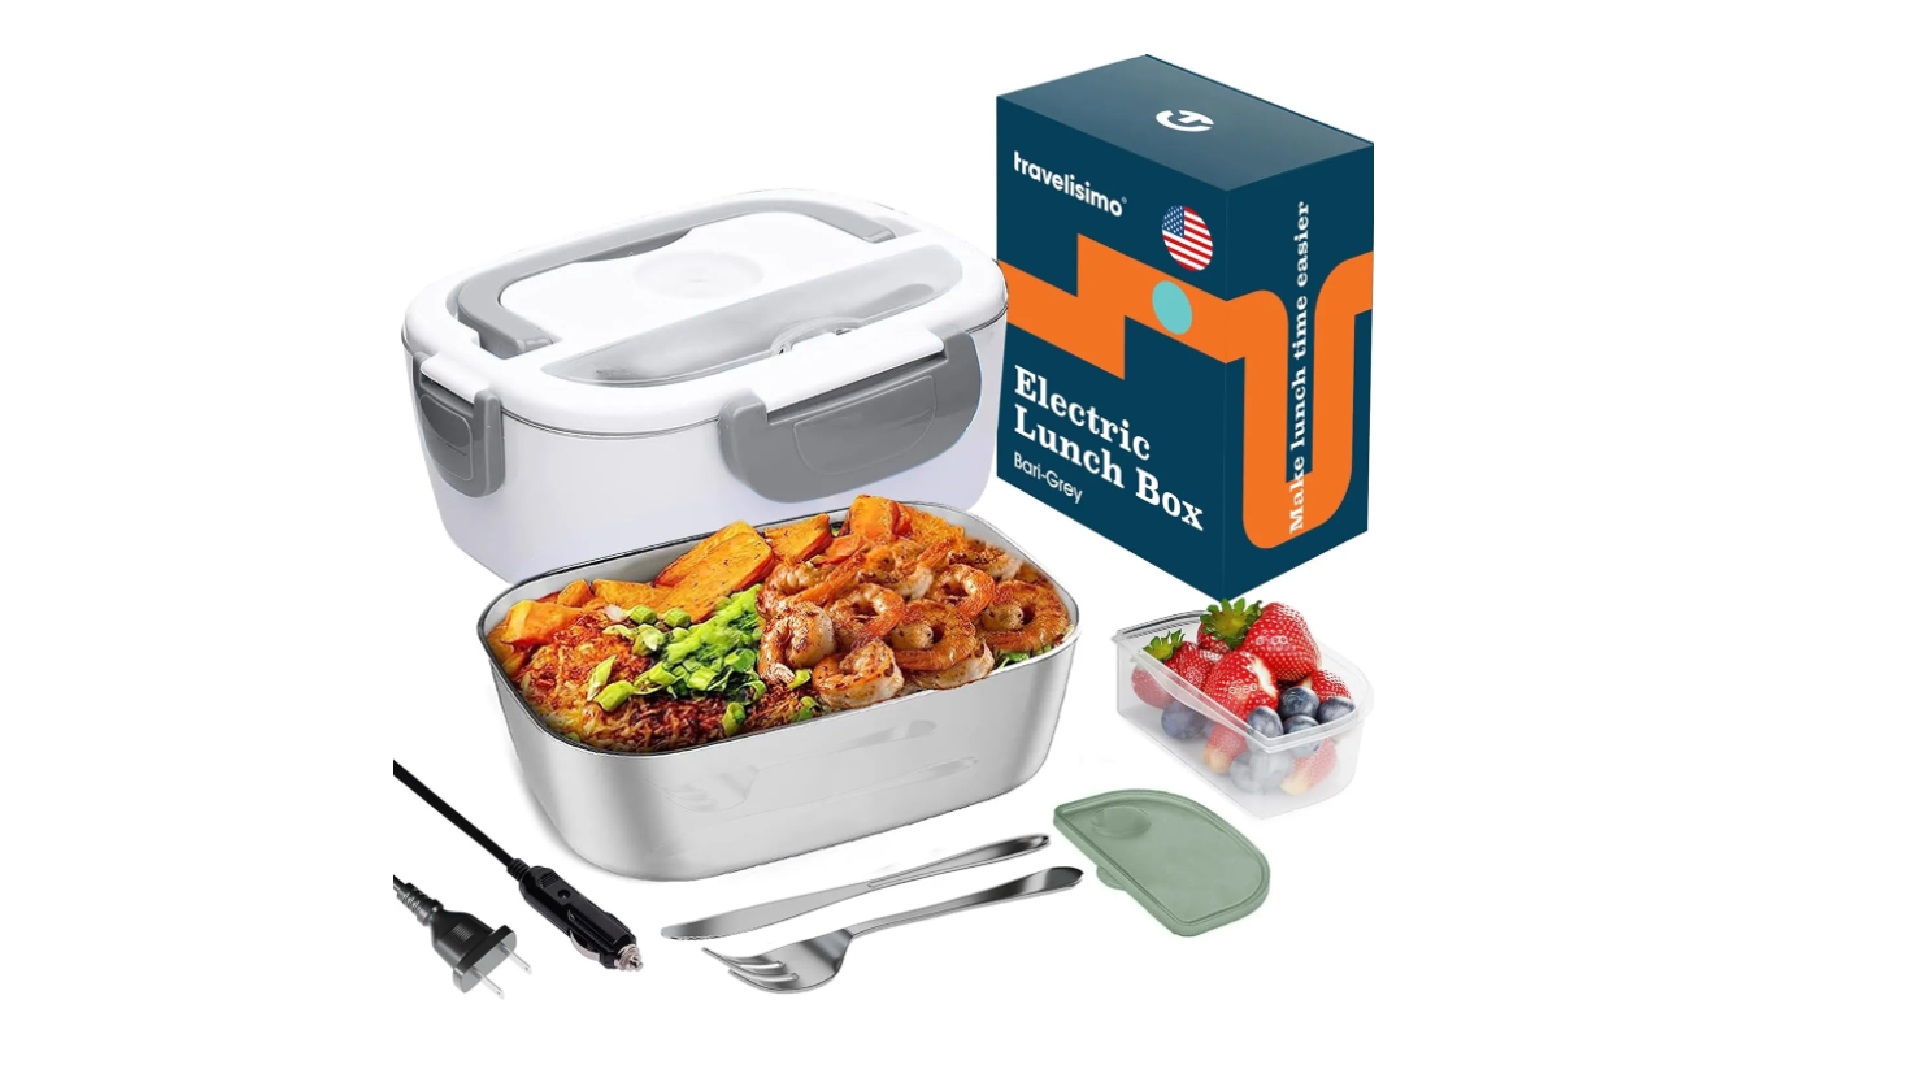 Crock Pot Electric Lunch Box Review (Best Portable Food Warmer